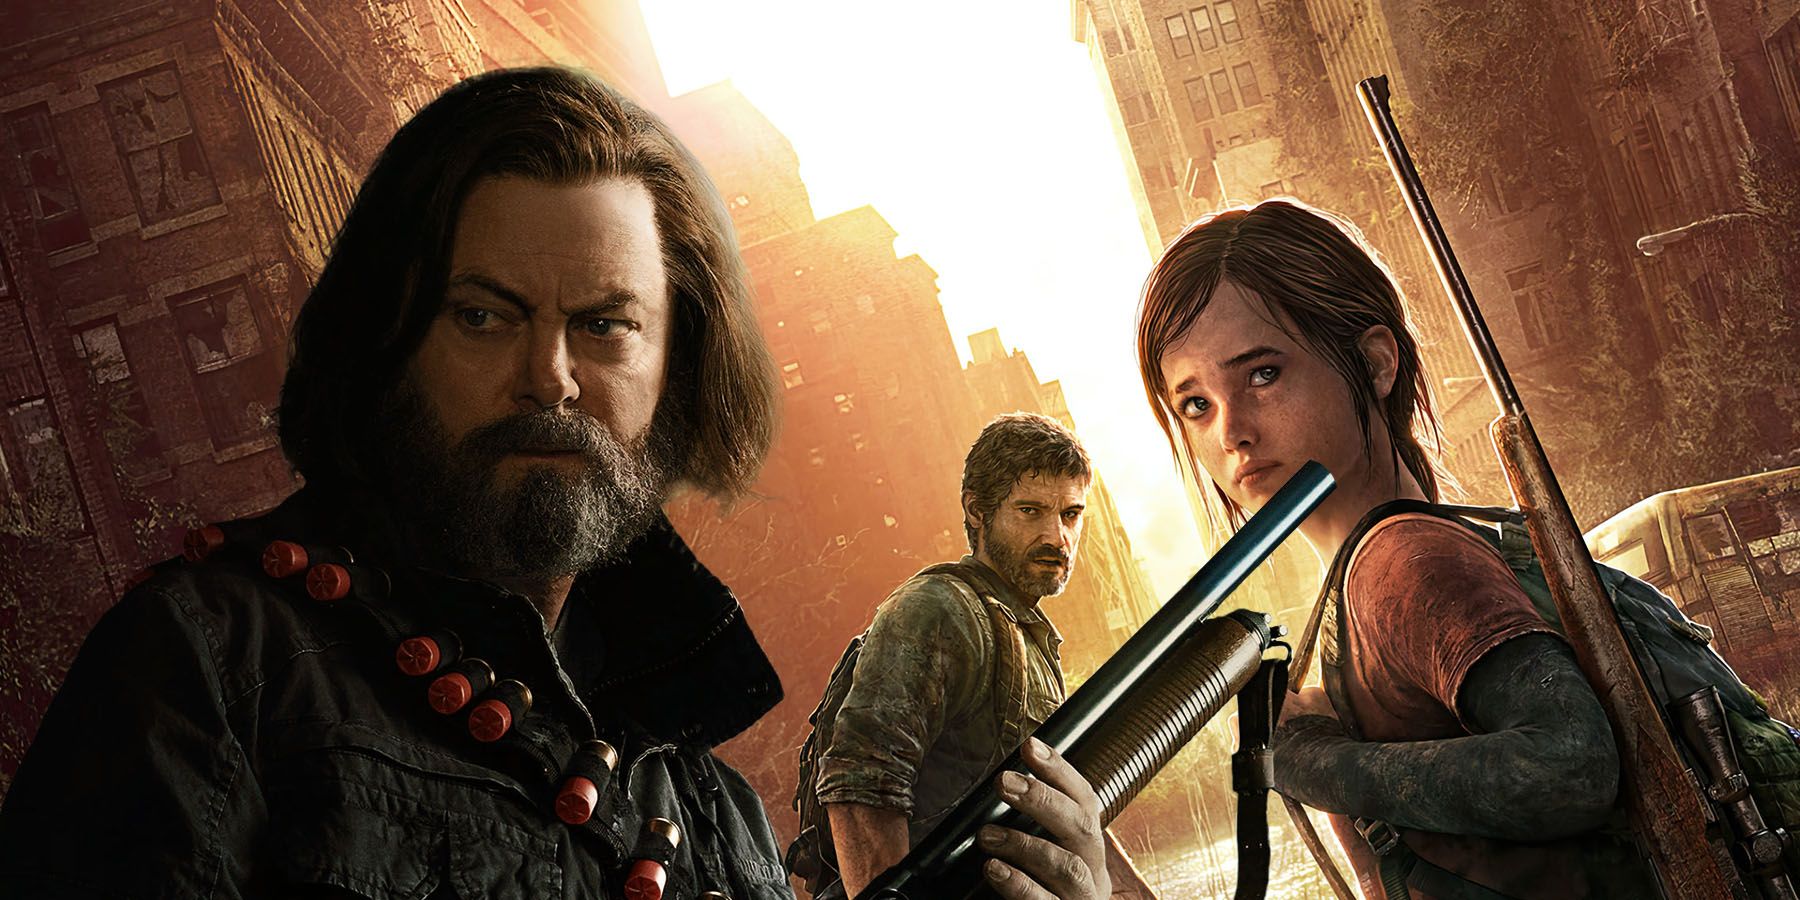 nick-offerman-reveals-why-he-has-not-played-the-last-of-us-game-gamerant